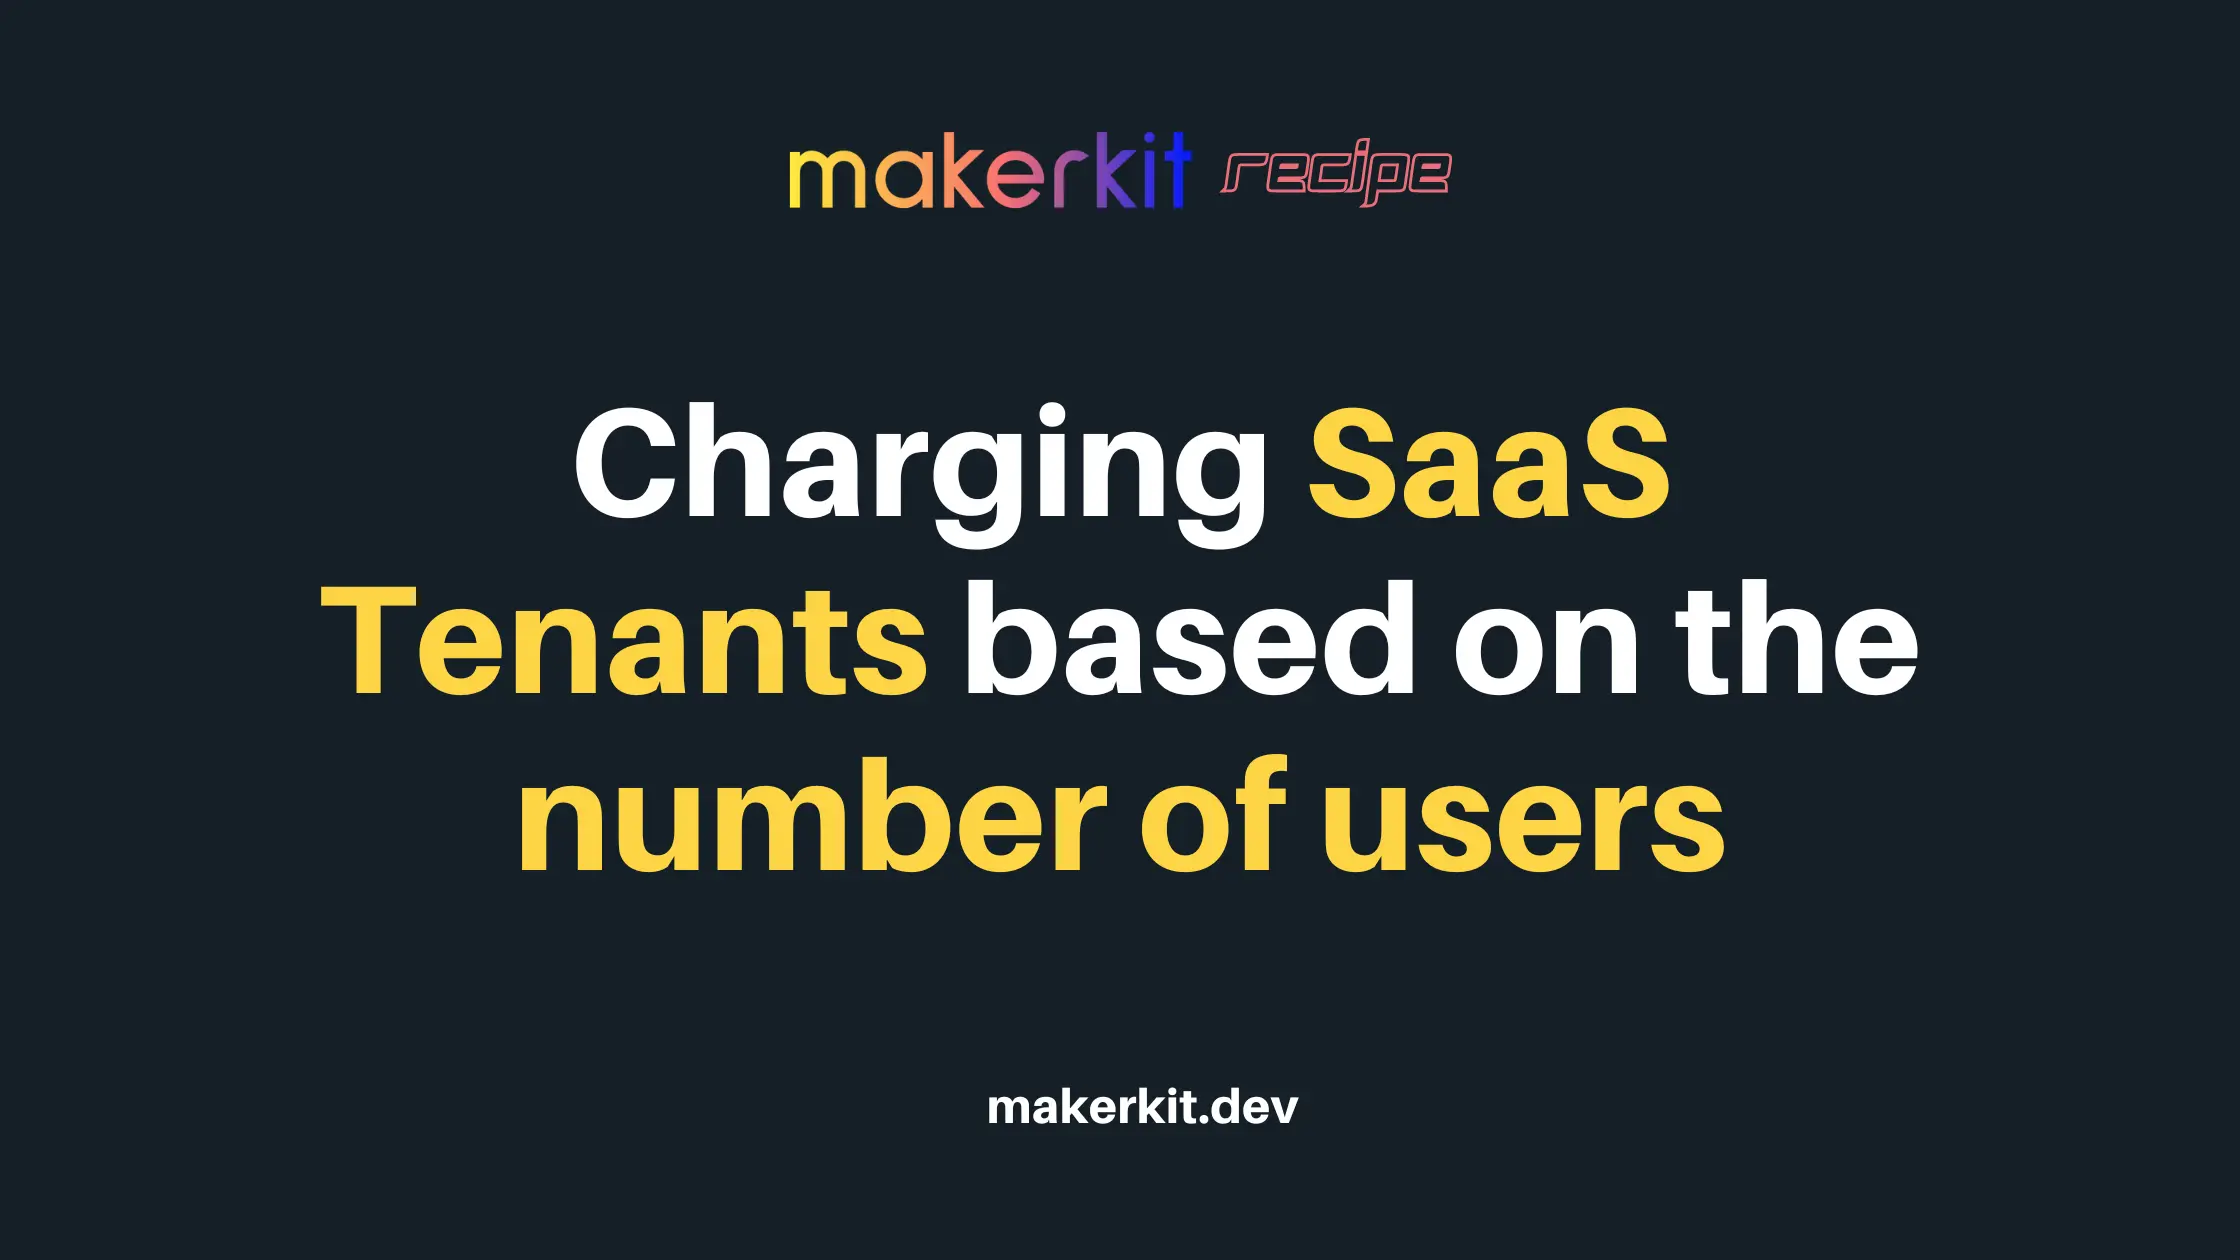 Cover Image for Charging SaaS Tenants based on the number of users